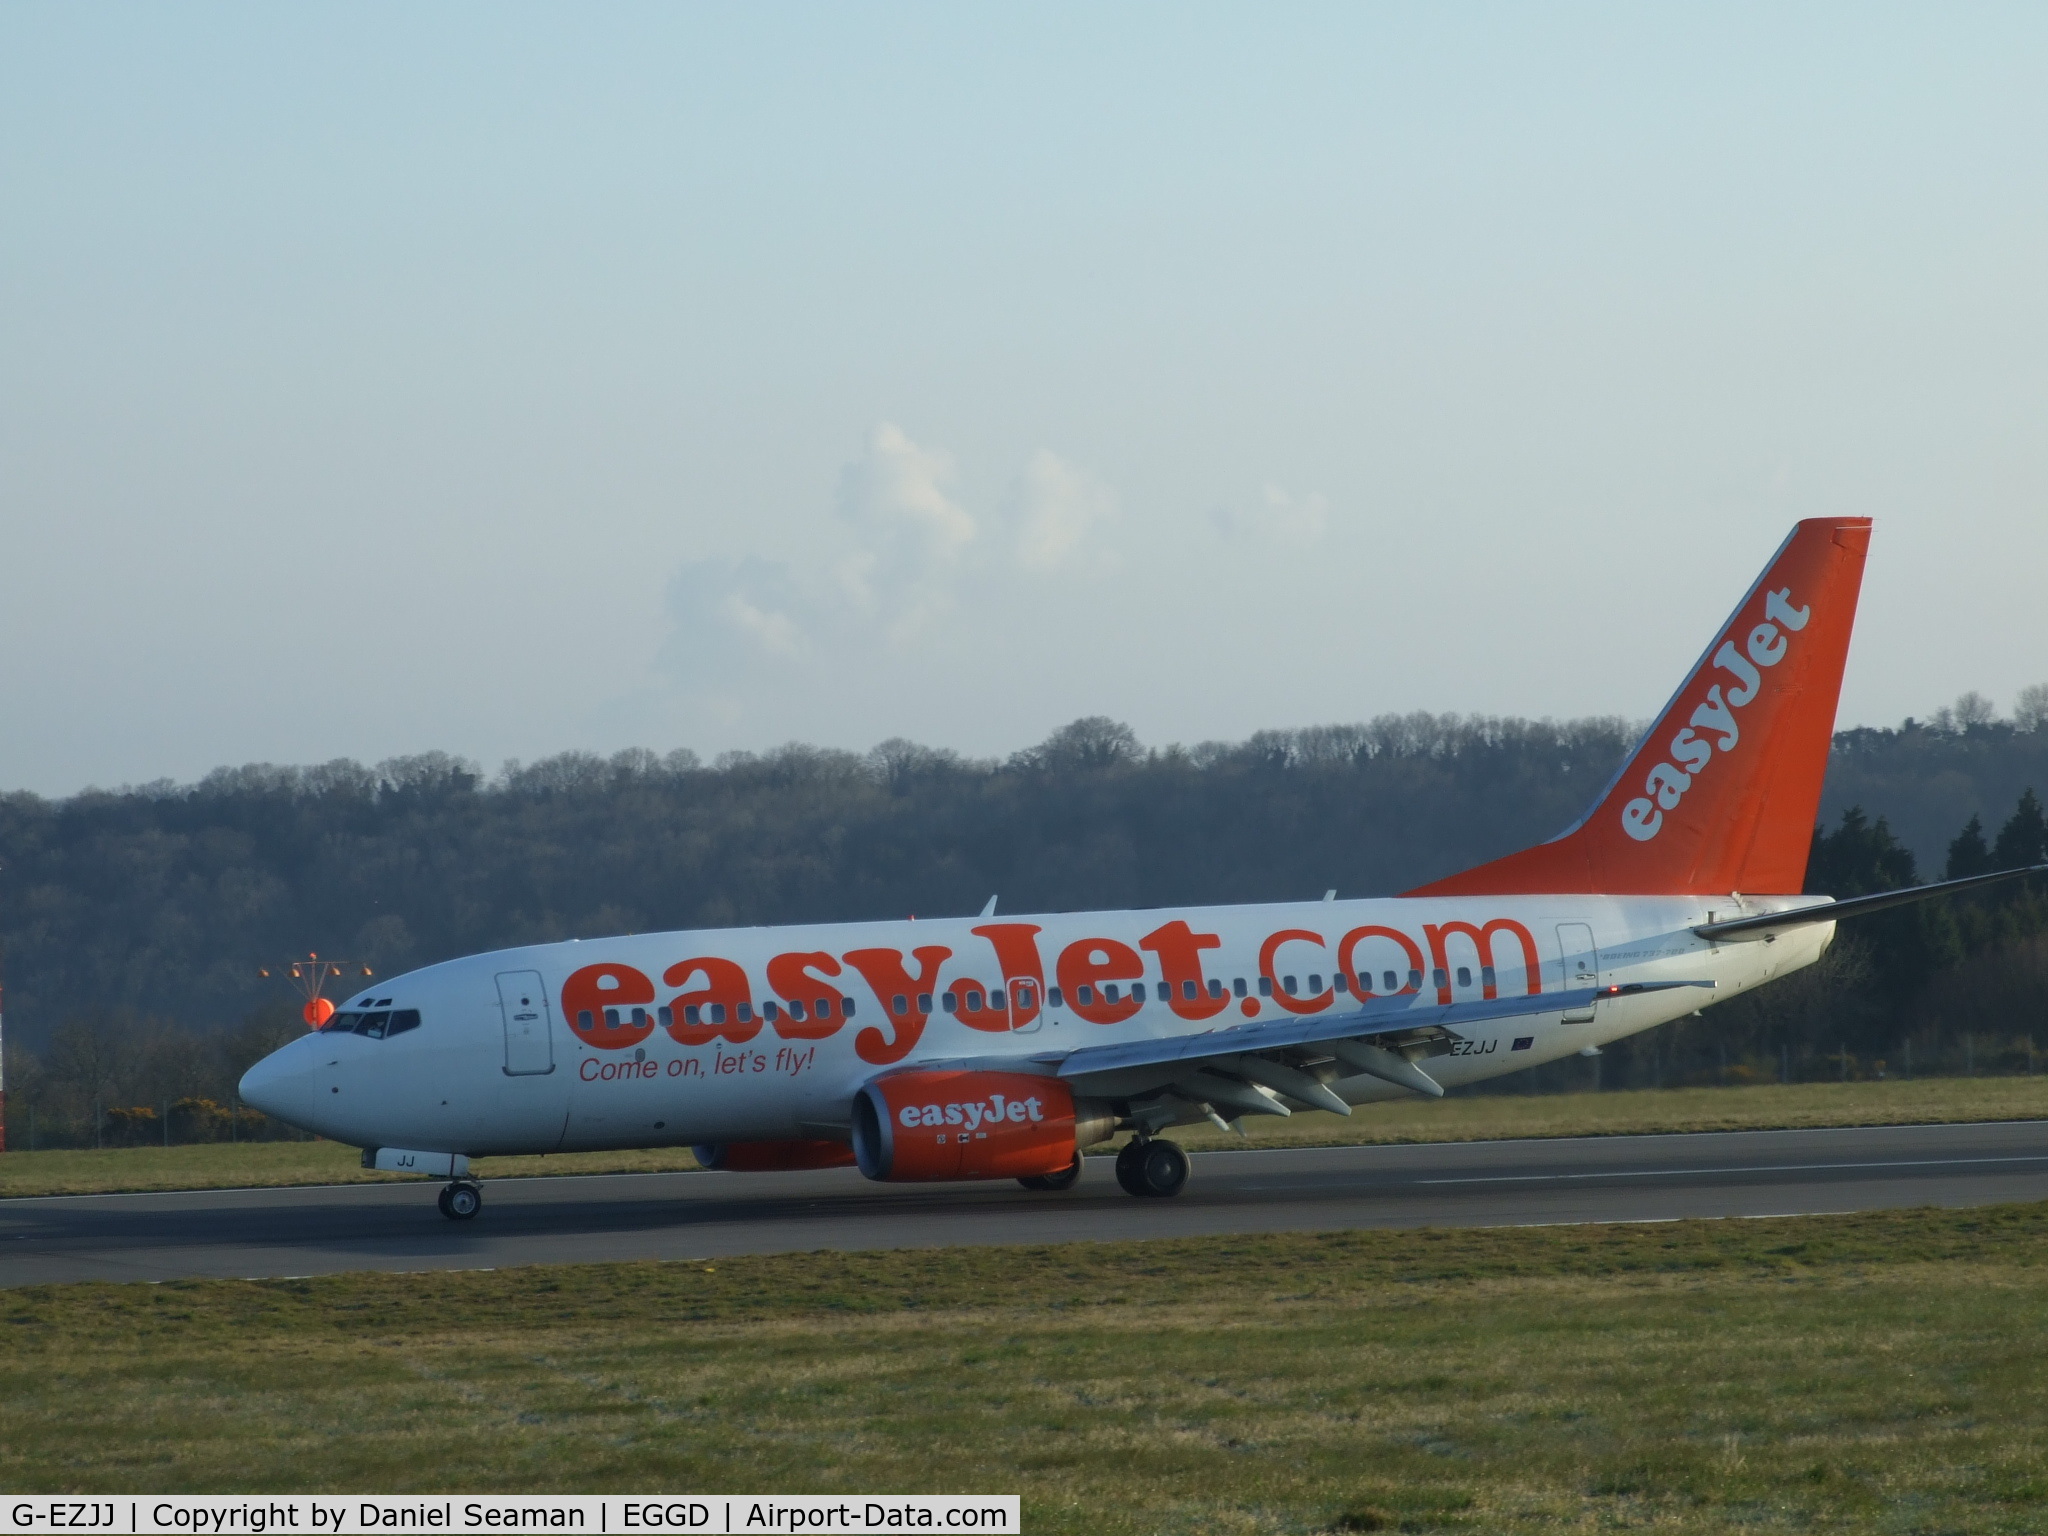 G-EZJJ, 2002 Boeing 737-73V C/N 30245, i have seen all the easyjet 737s and only need 4 pictures.